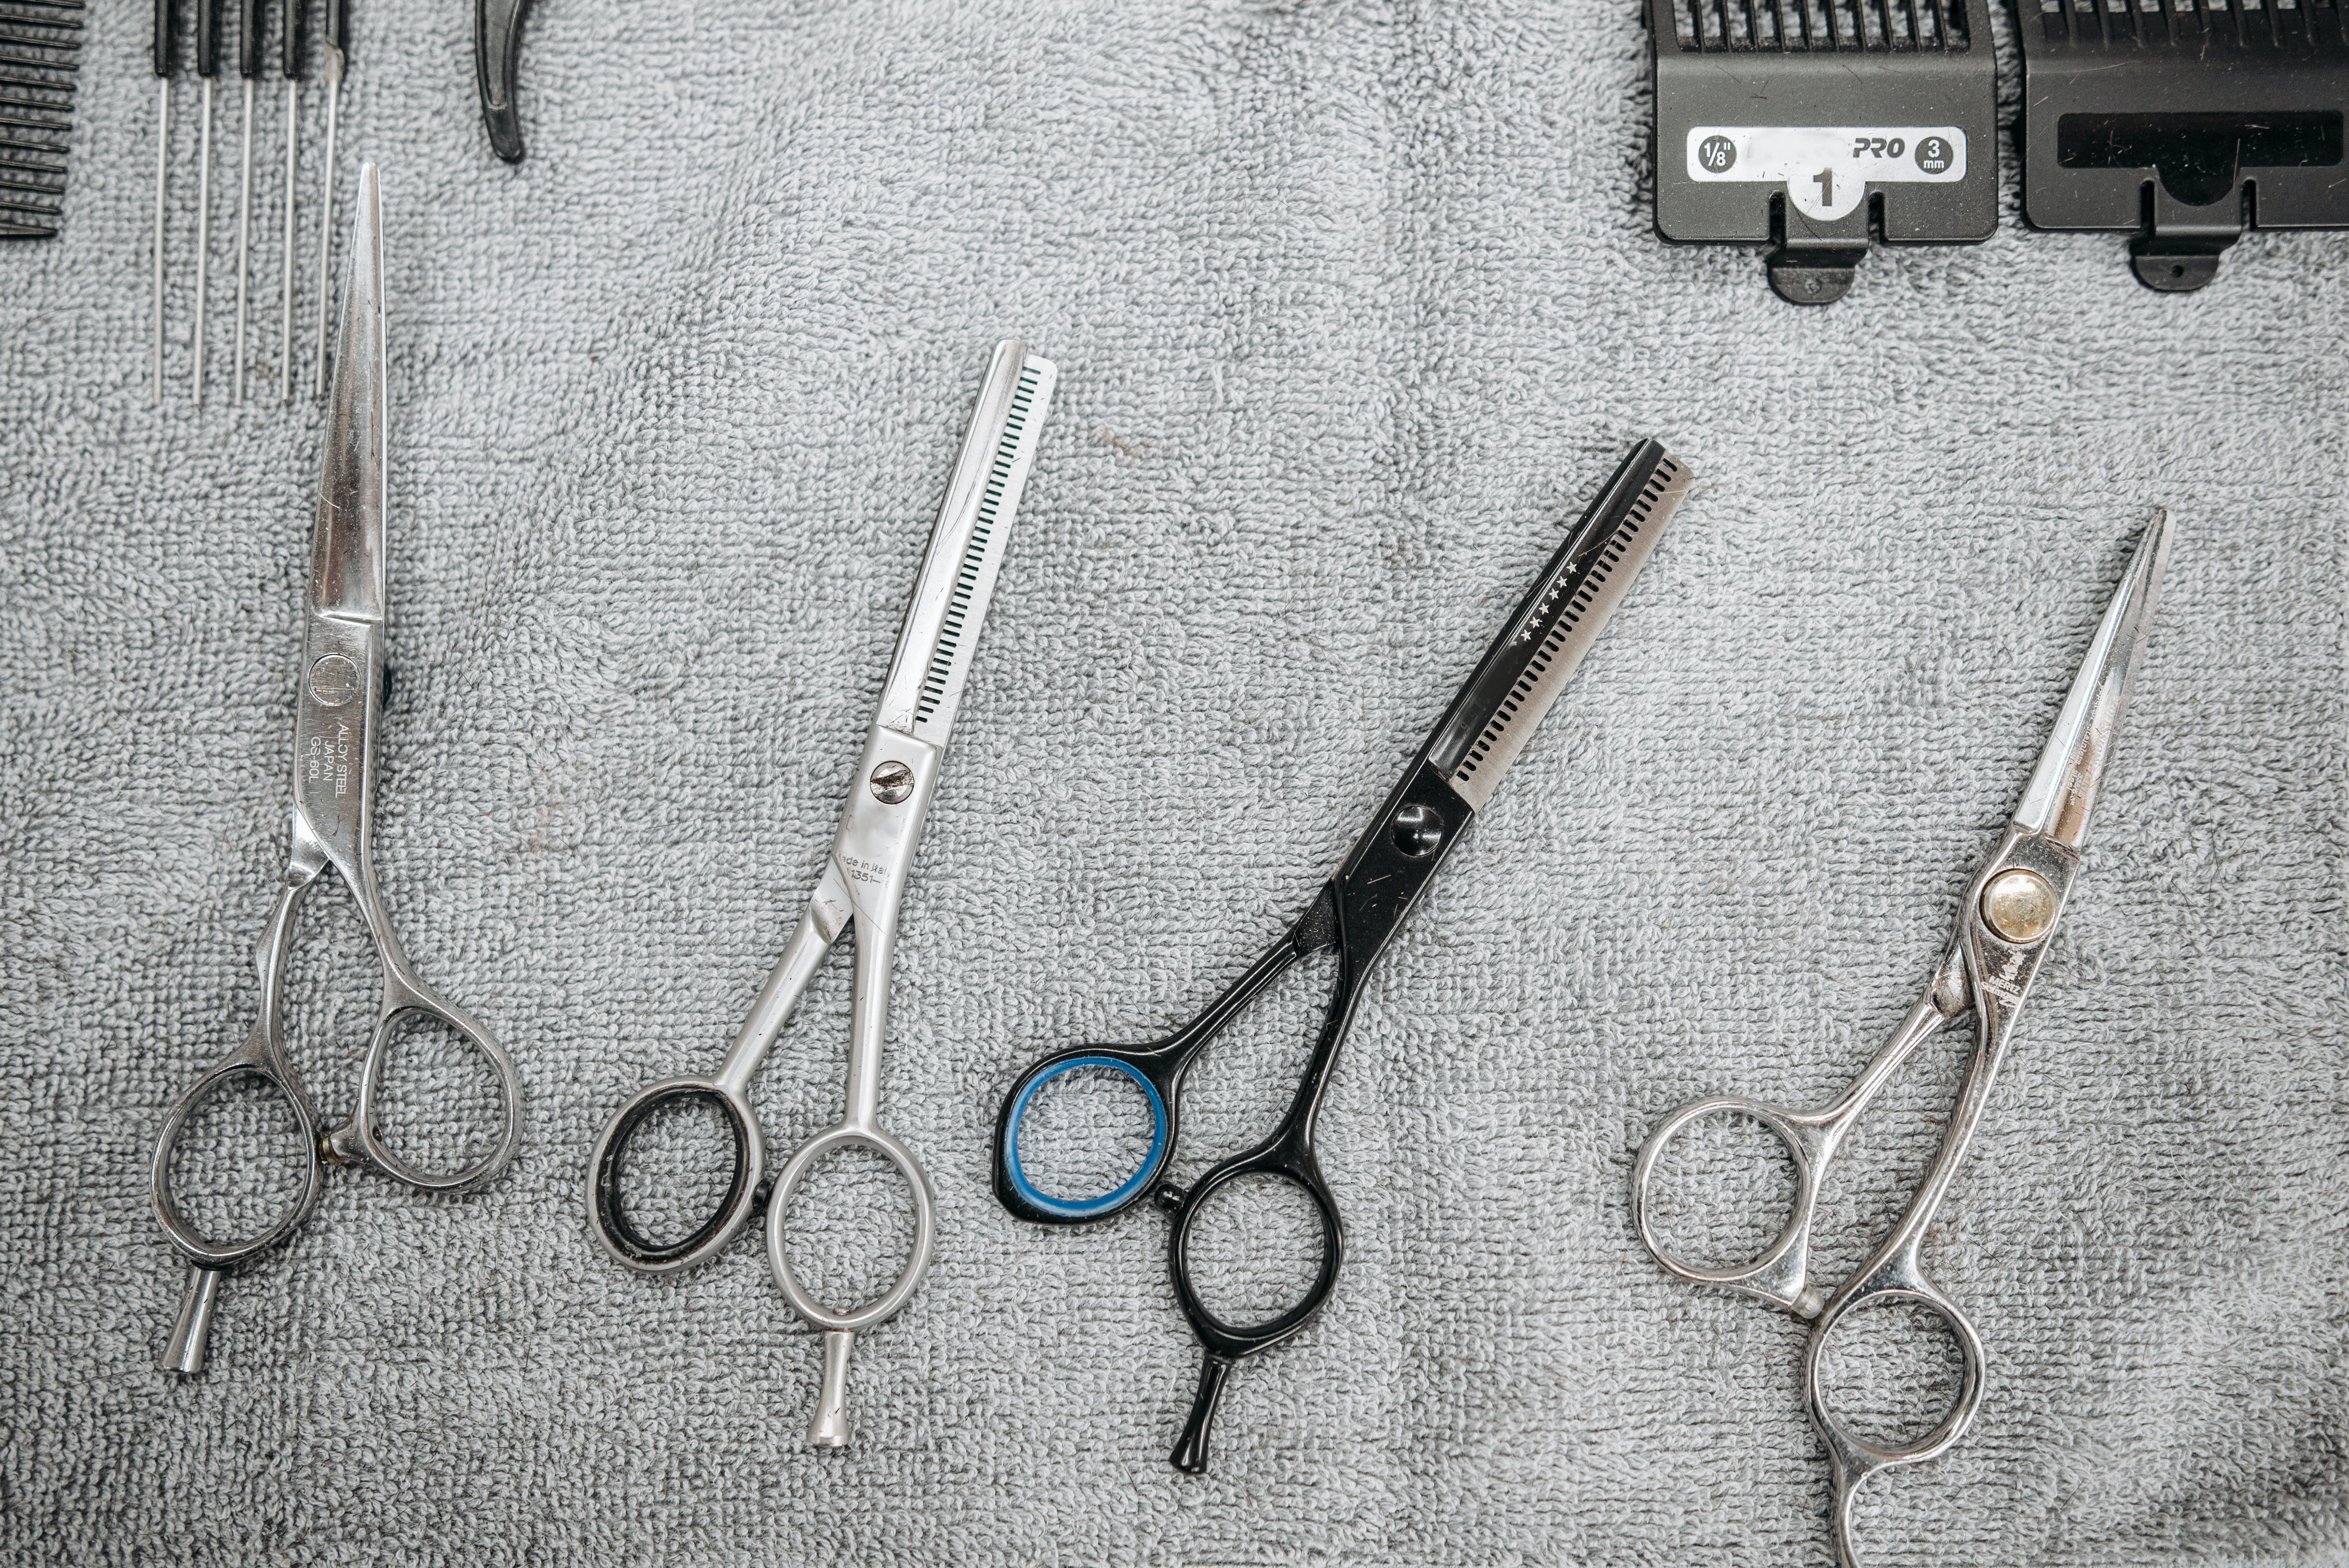 In-Depth Review: Best Barber Scissors Brands for Precision Cutting